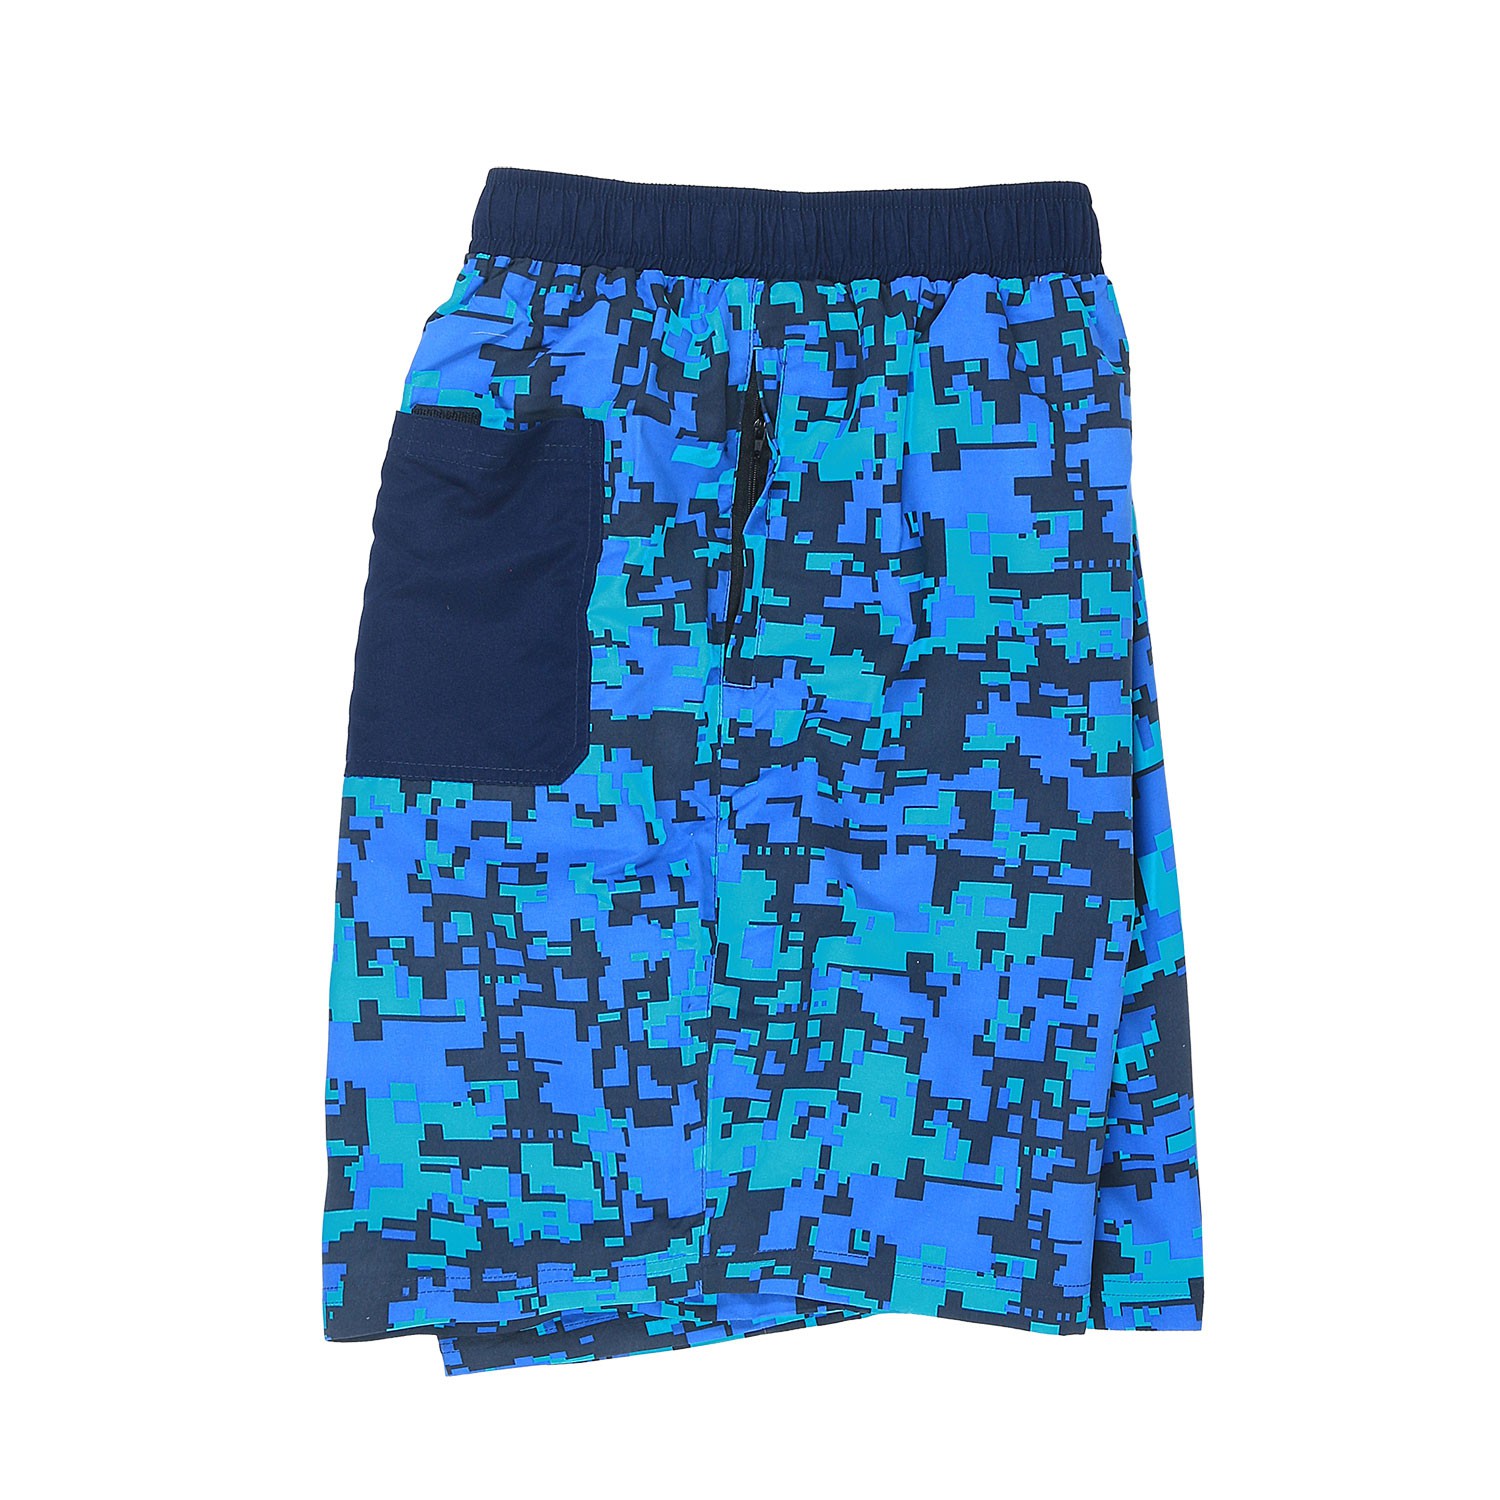 Abraxas swimming trunks in big sizes up to 10XL, print blue